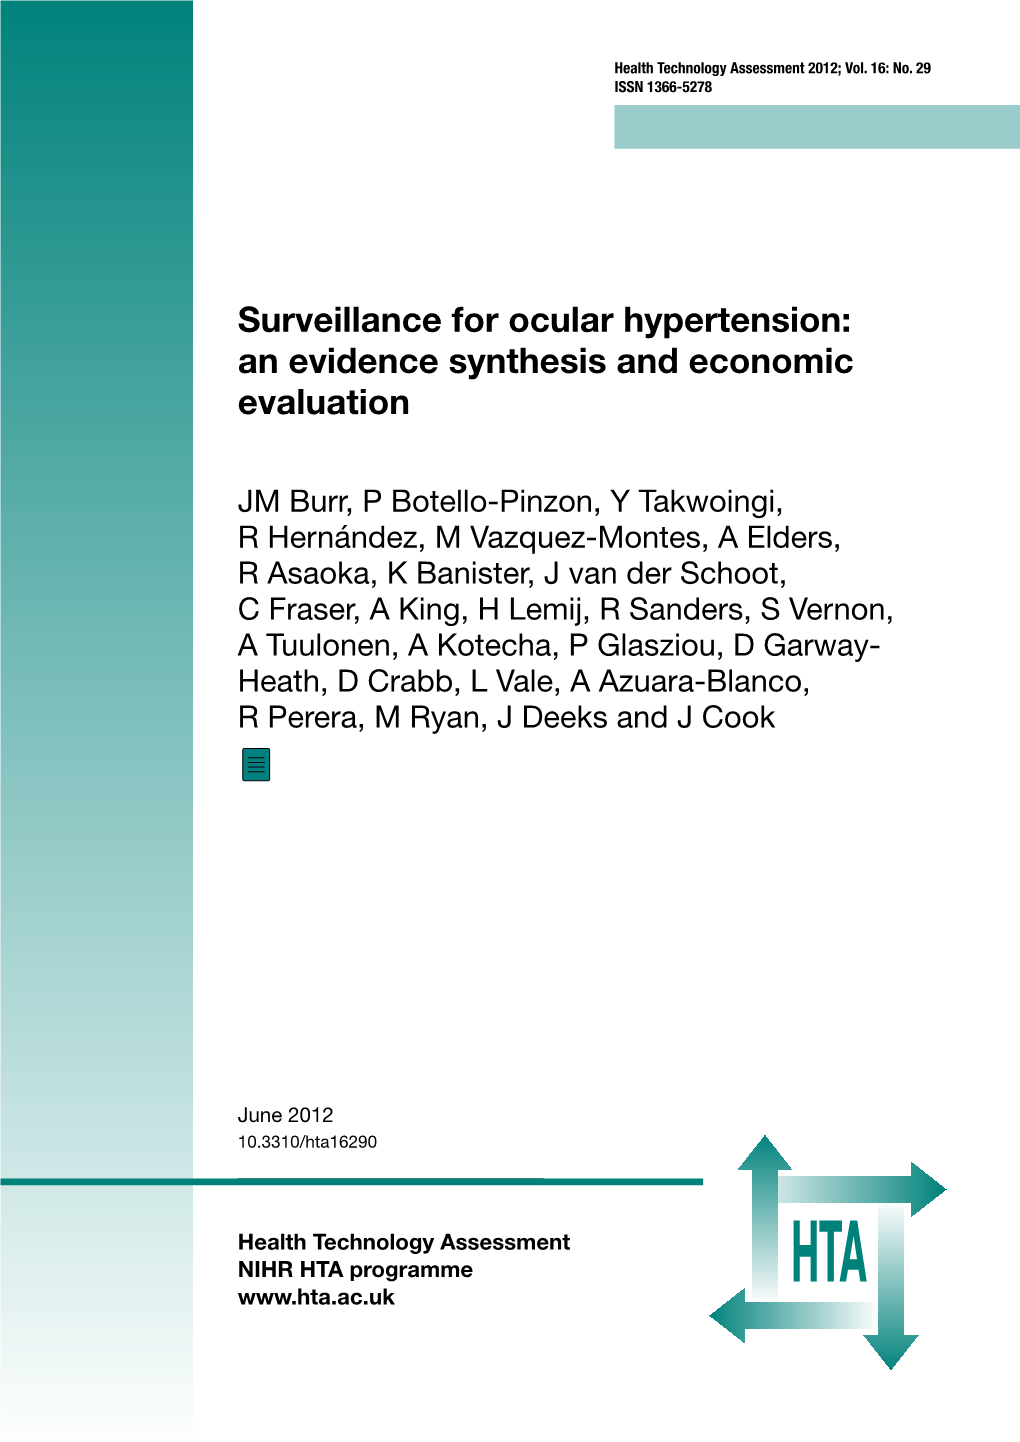 Surveillance for Ocular Hypertension: an Evidence Synthesis and Economic Evaluation. Health Technol Assess 2012;16(29)